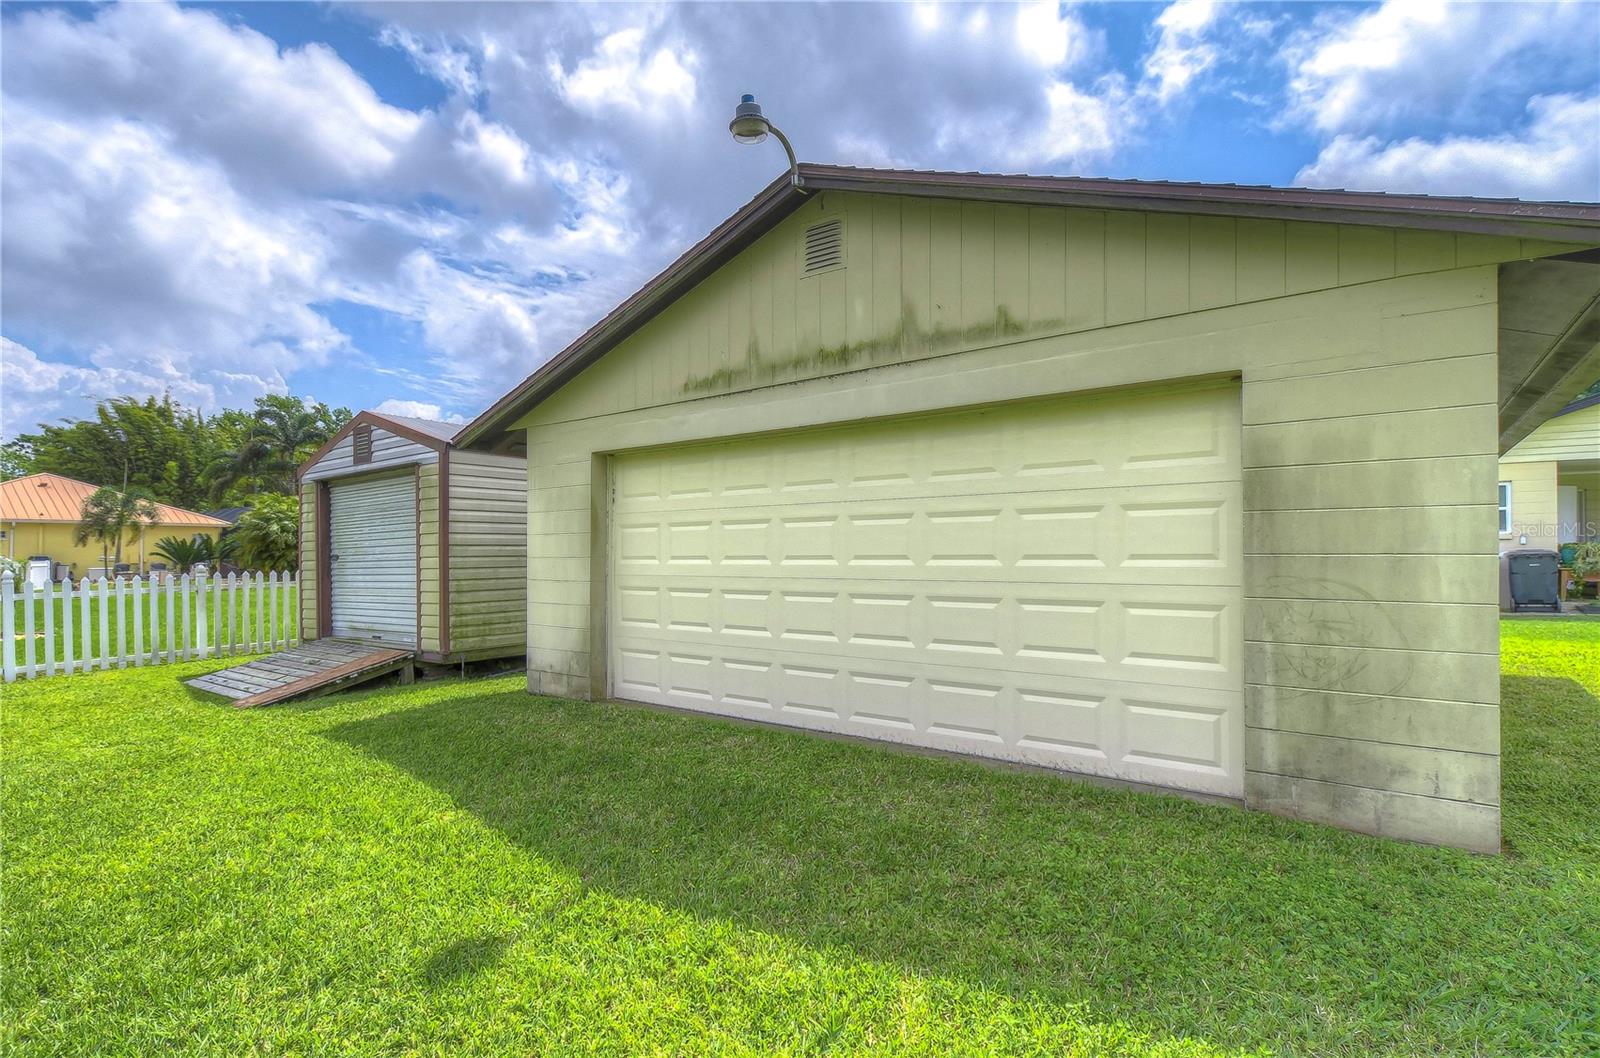 A detached two-car garage offers homeowners additional car storage or the perfect workshop.